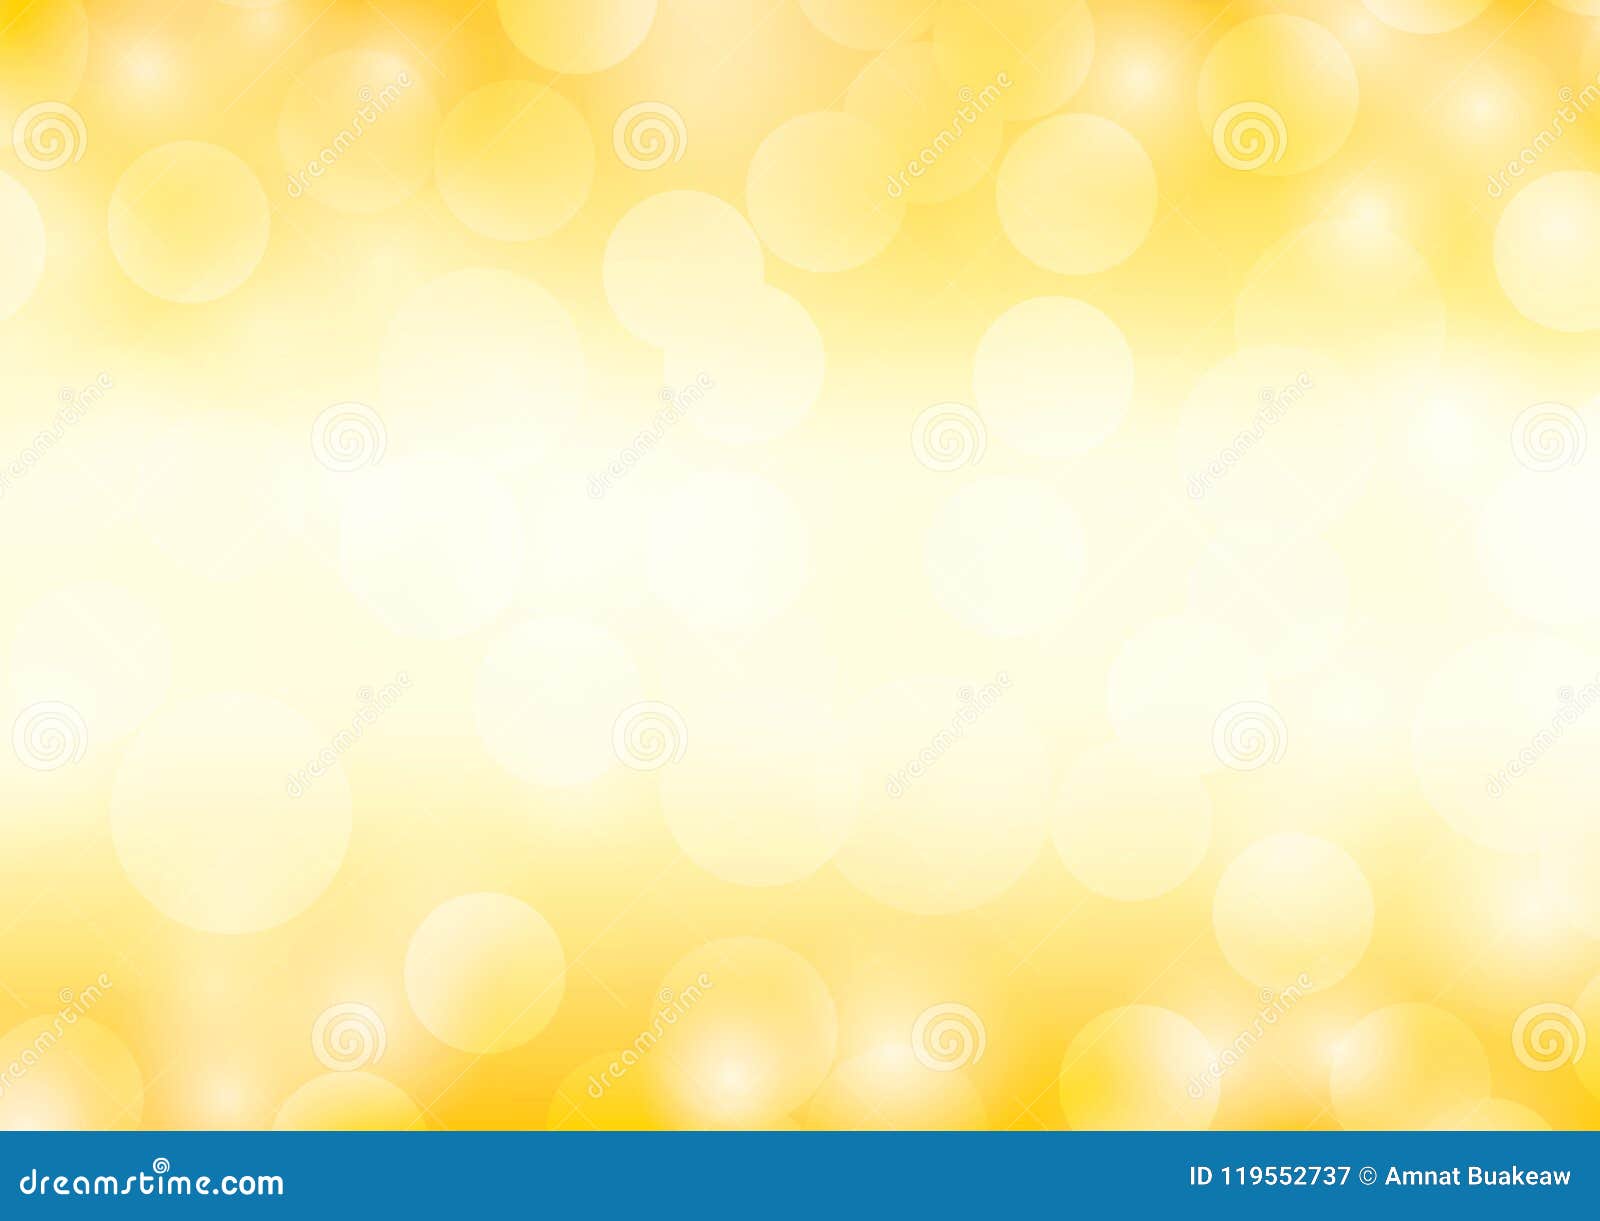 Yellow Background Bokeh Glittering Luxury Abstract Light Sparkling Blurred  Gradient Stock Illustration - Illustration of glittering, beautiful:  119552737